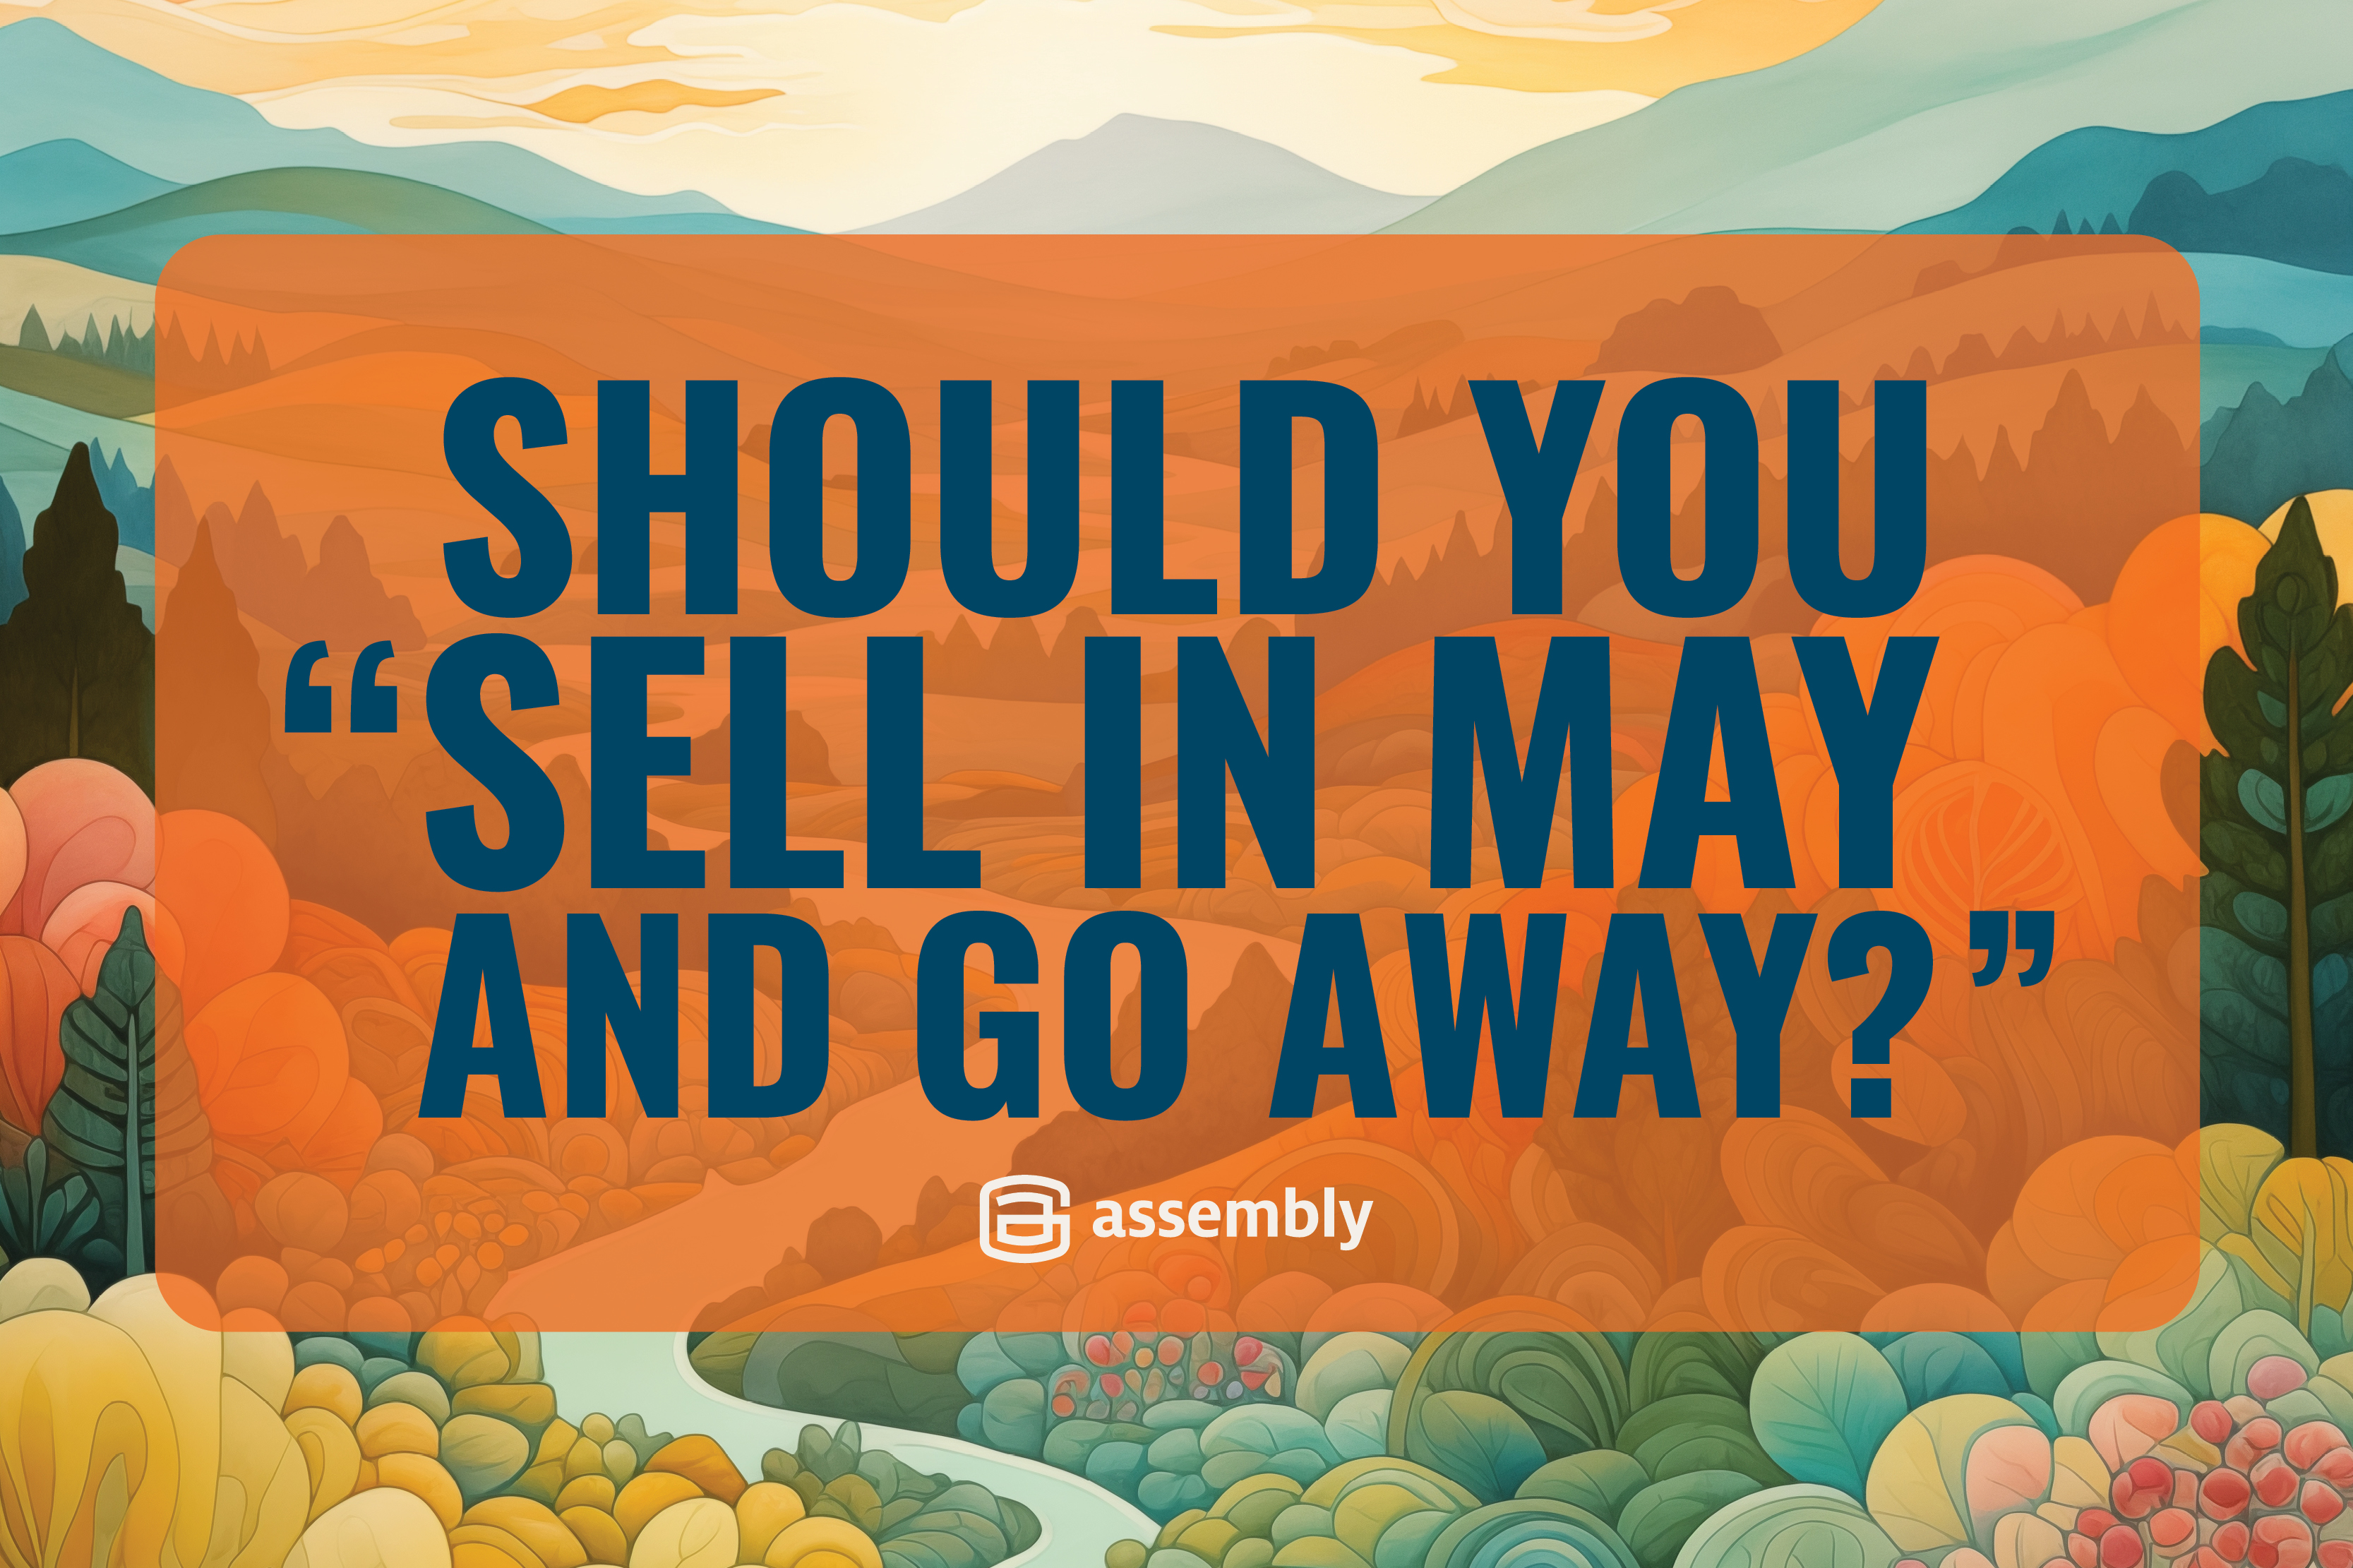 Should You “Sell in May and Go Away?”